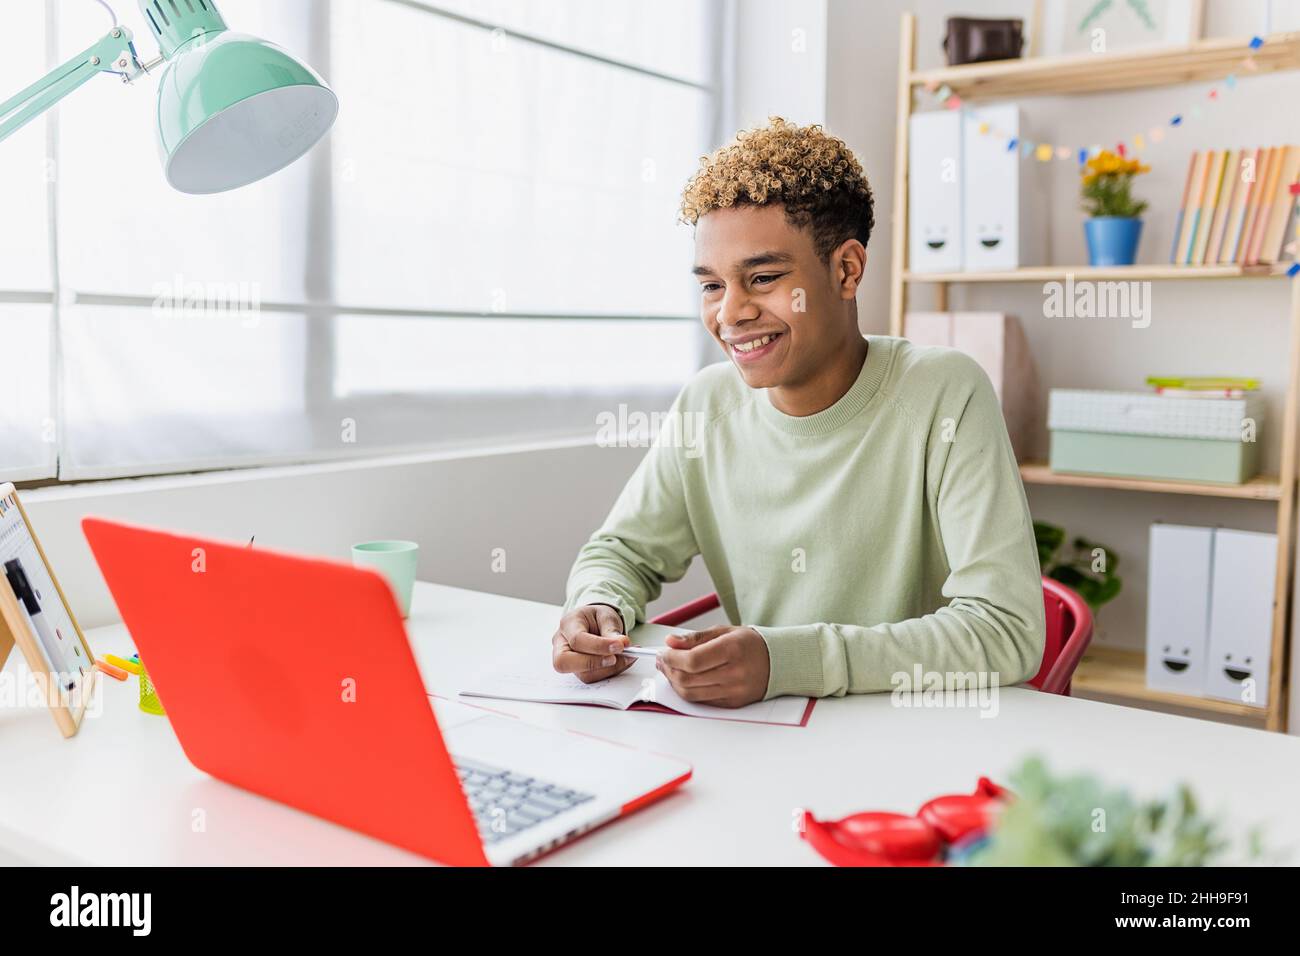 Smiling boy studying online from home having a video conference on laptop  Stock Photo